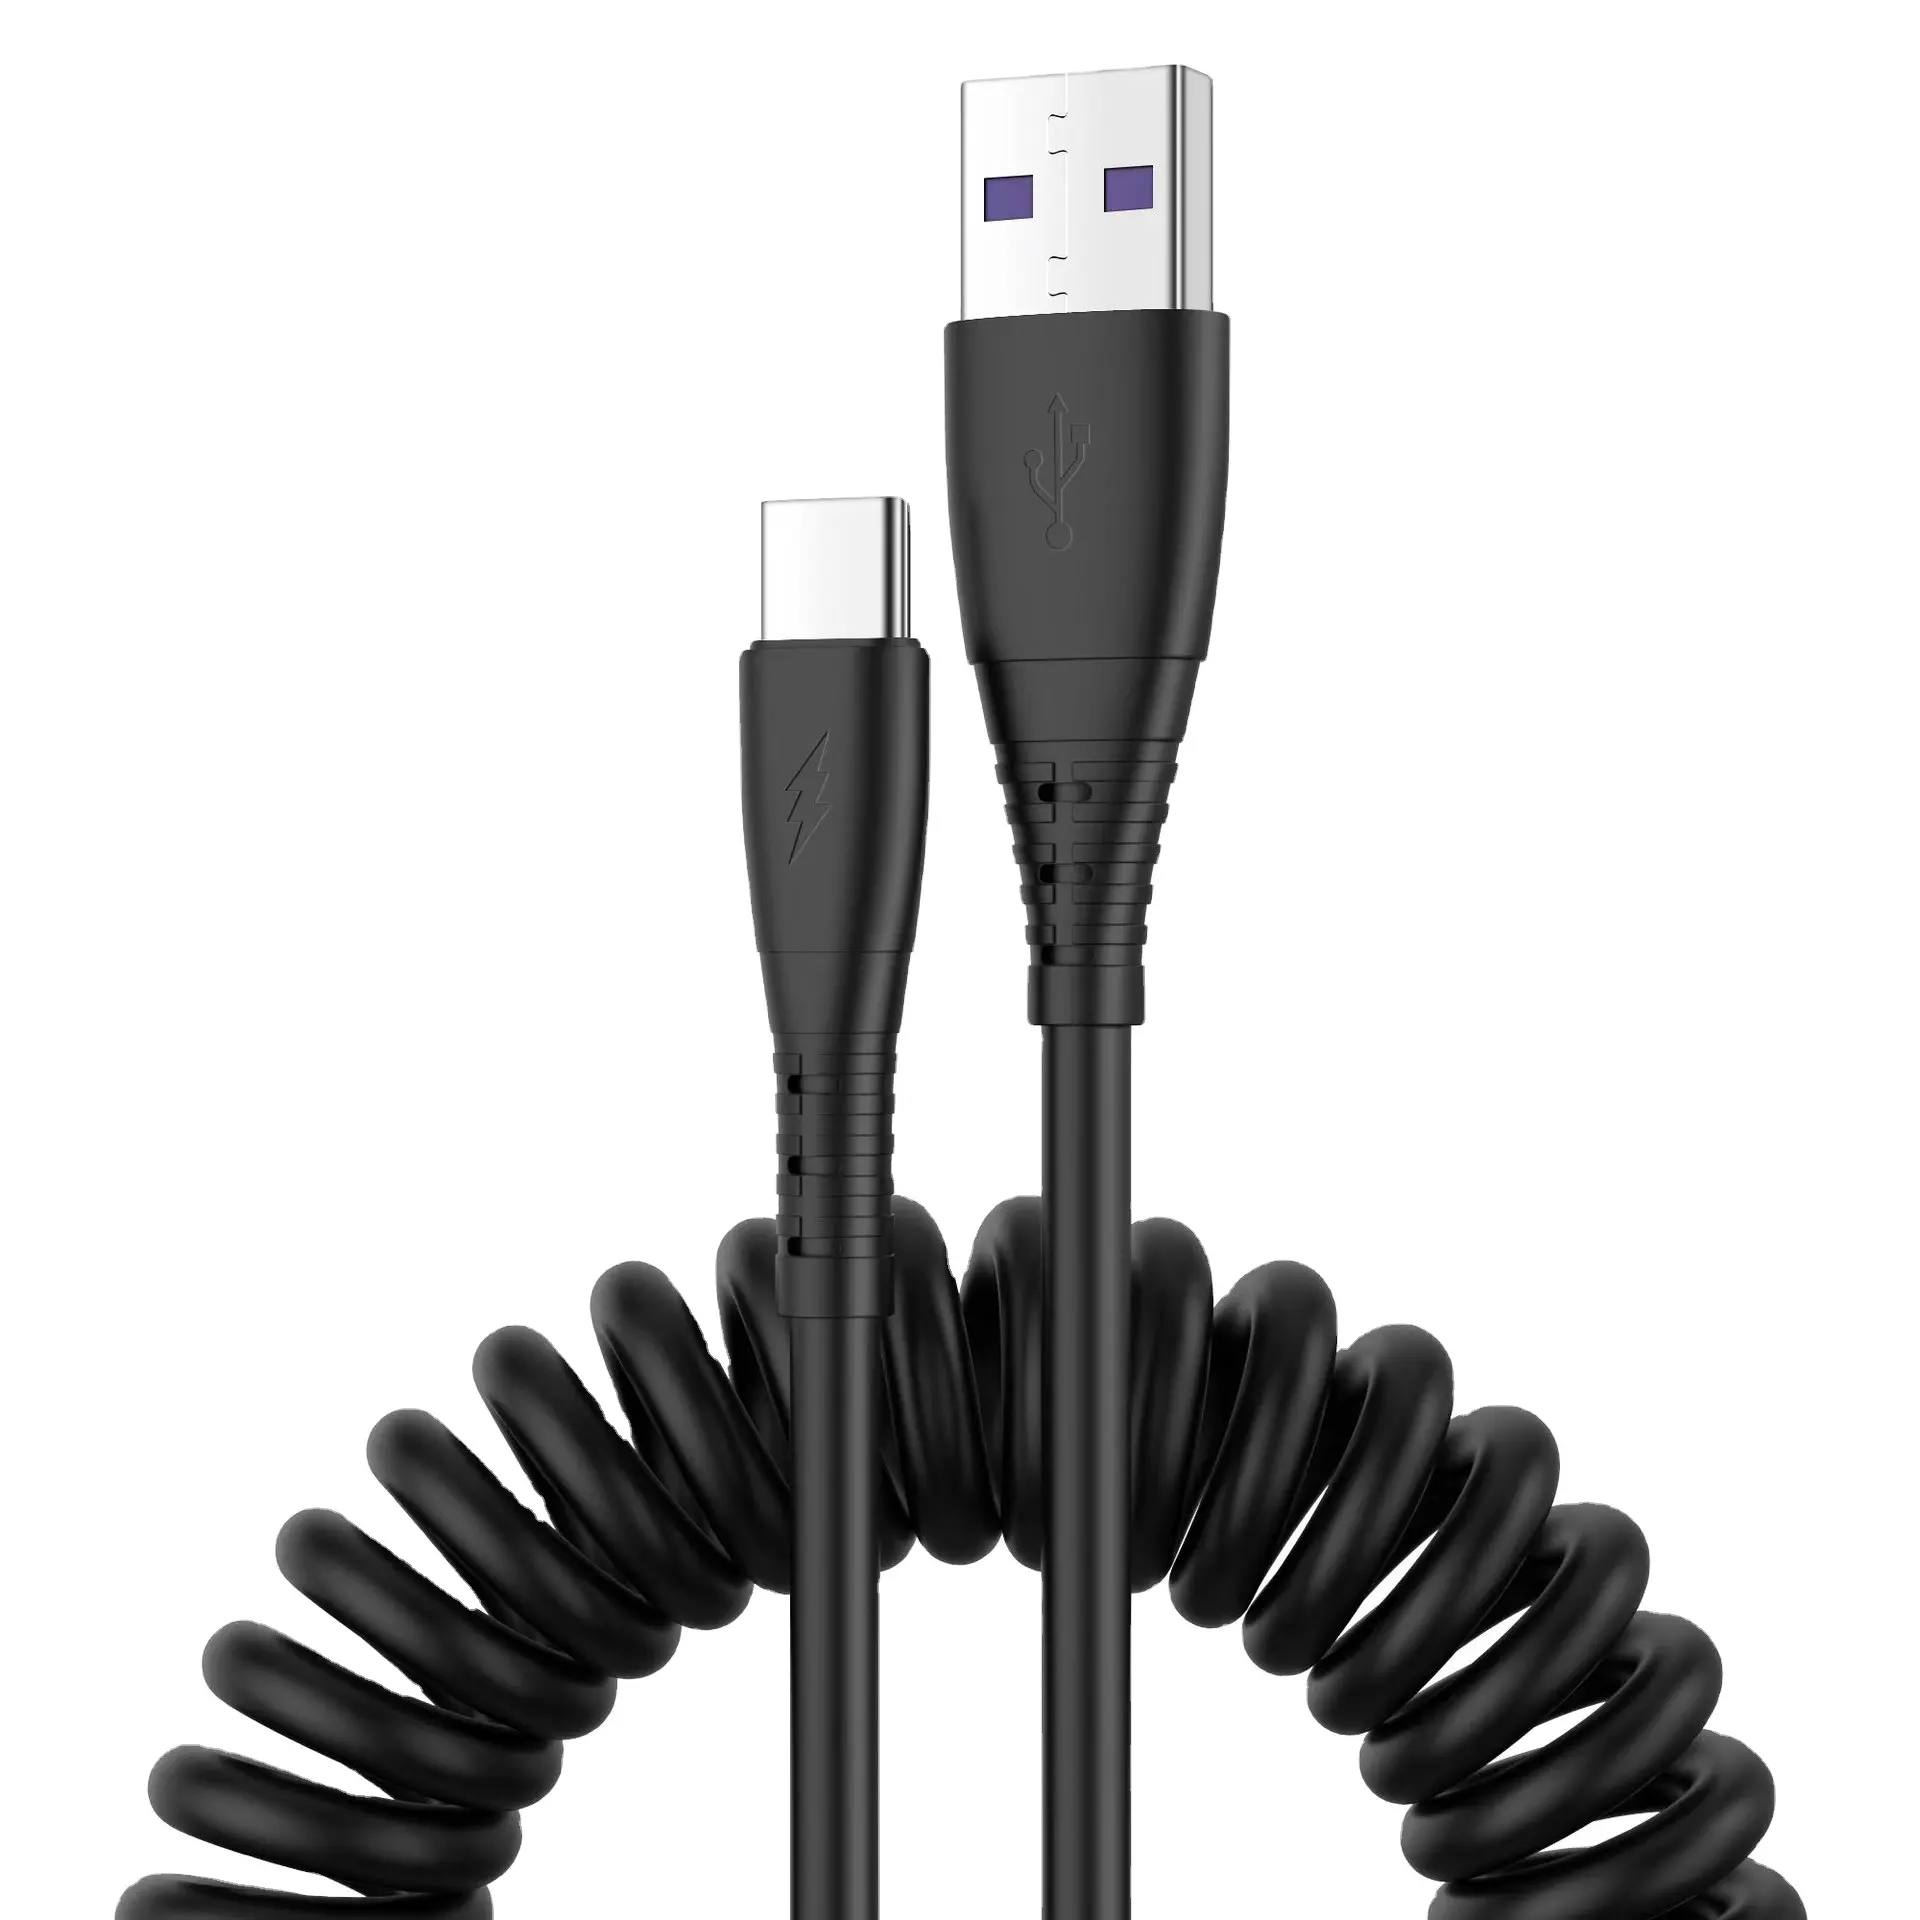 New product creative spring elastic data cable suitable for Apple Android type mobile phone car USB charging cable